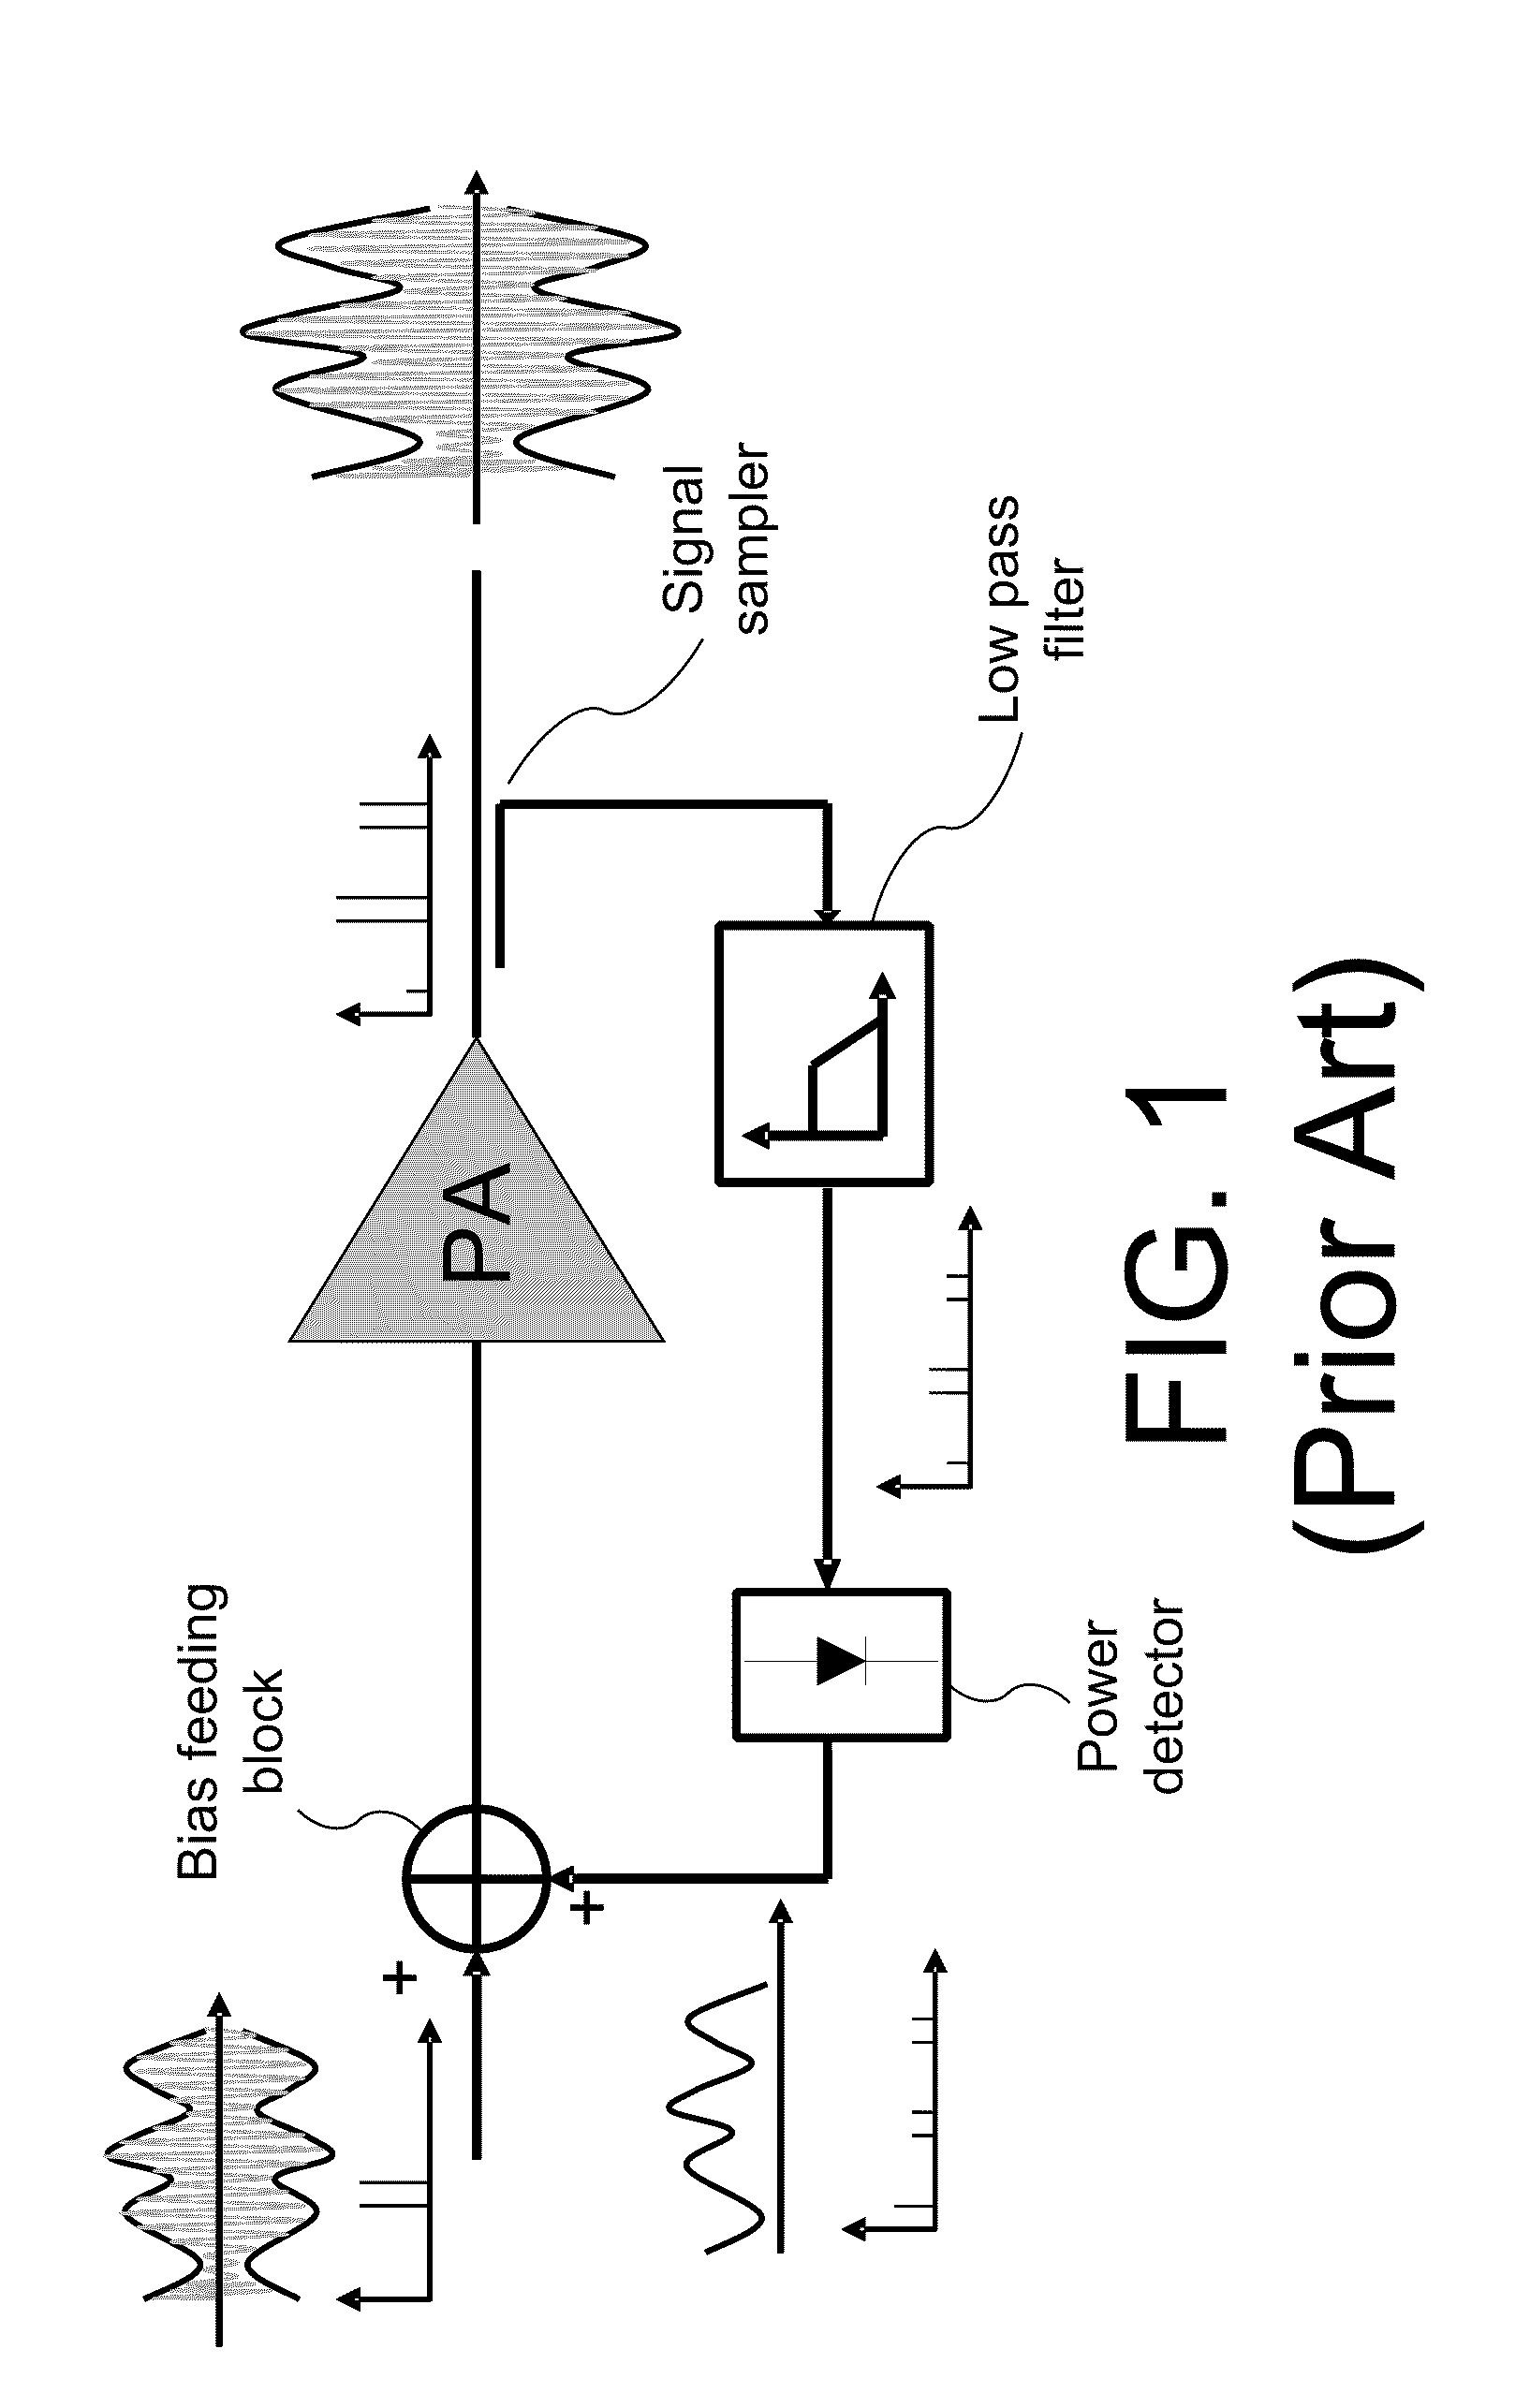 Systems and methods for self-mixing adaptive bias circuit for power amplifier